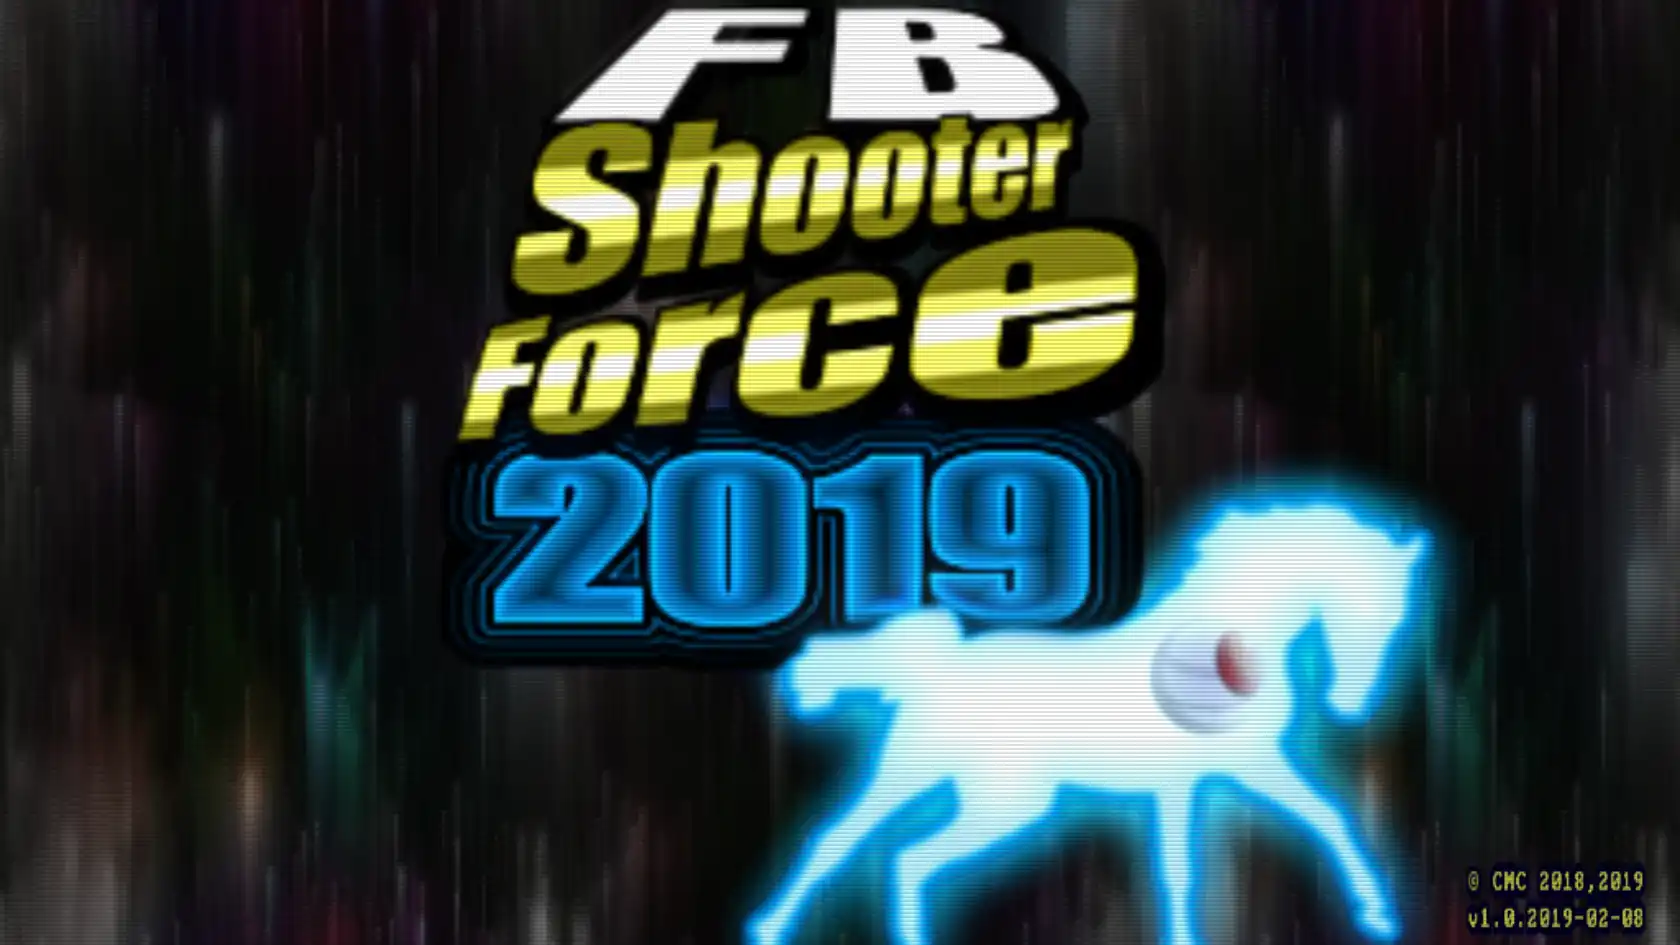 Download web tool or web app FB Shooter Force 2019 to run in Linux online